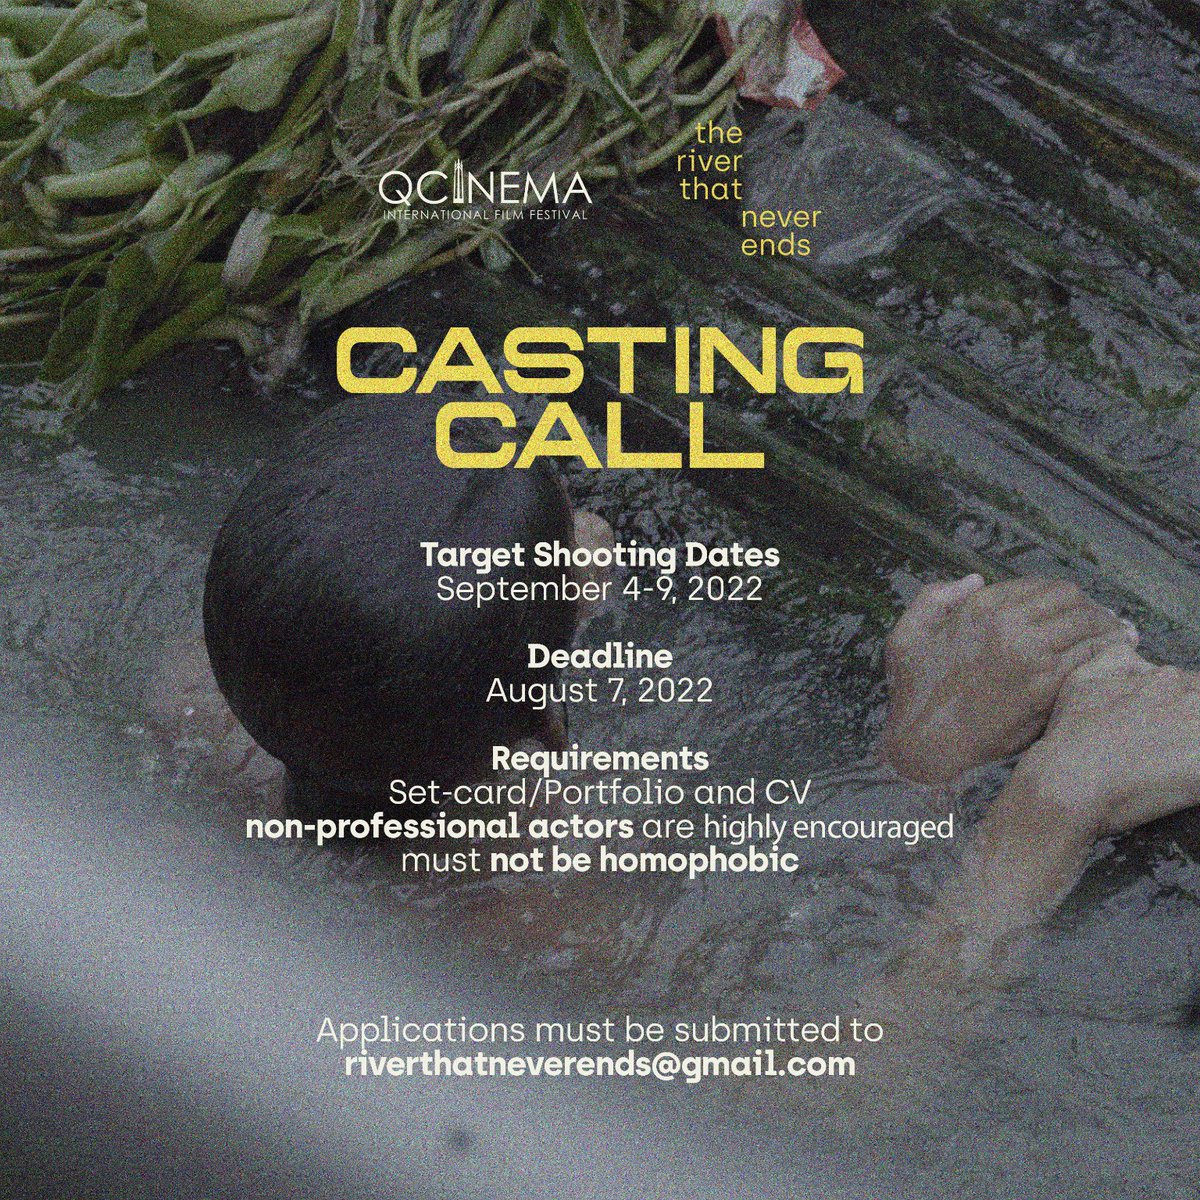 The river needs you! 🌊

QCShorts 2022 film 'the river that never ends' is looking for three actors to be part of the film.

Submission of the set card or portfolio and CV is on or before August 7, 2022.

If interested, please email riverthatneverends@gmail.com. Thank you!